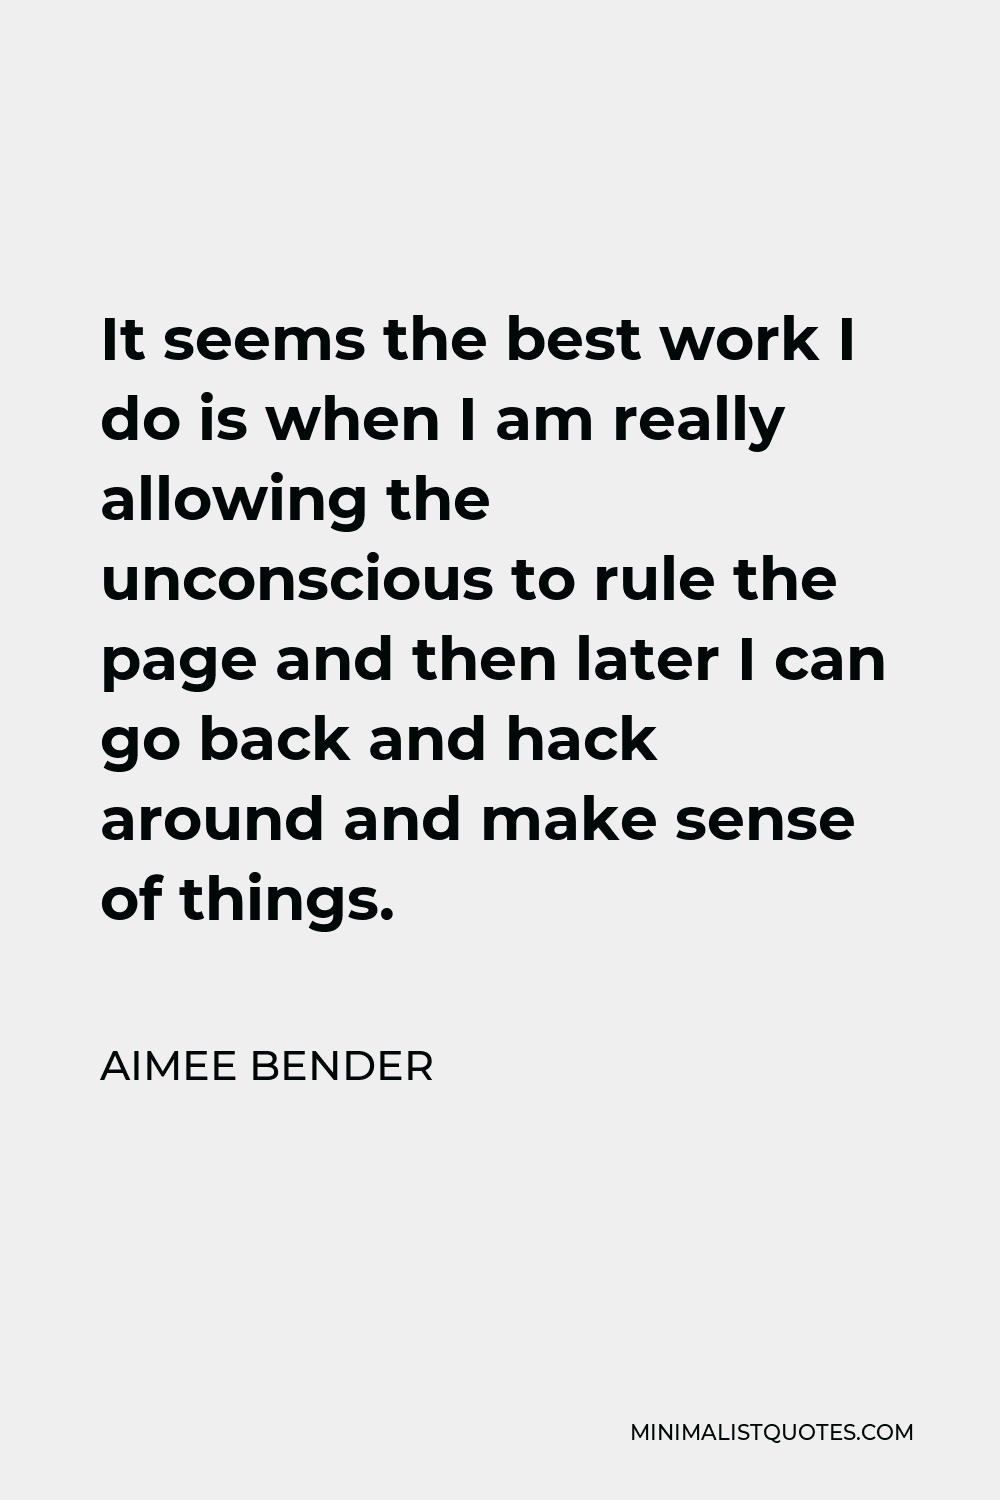 Aimee Bender Quote - It seems the best work I do is when I am really allowing the unconscious to rule the page and then later I can go back and hack around and make sense of things.